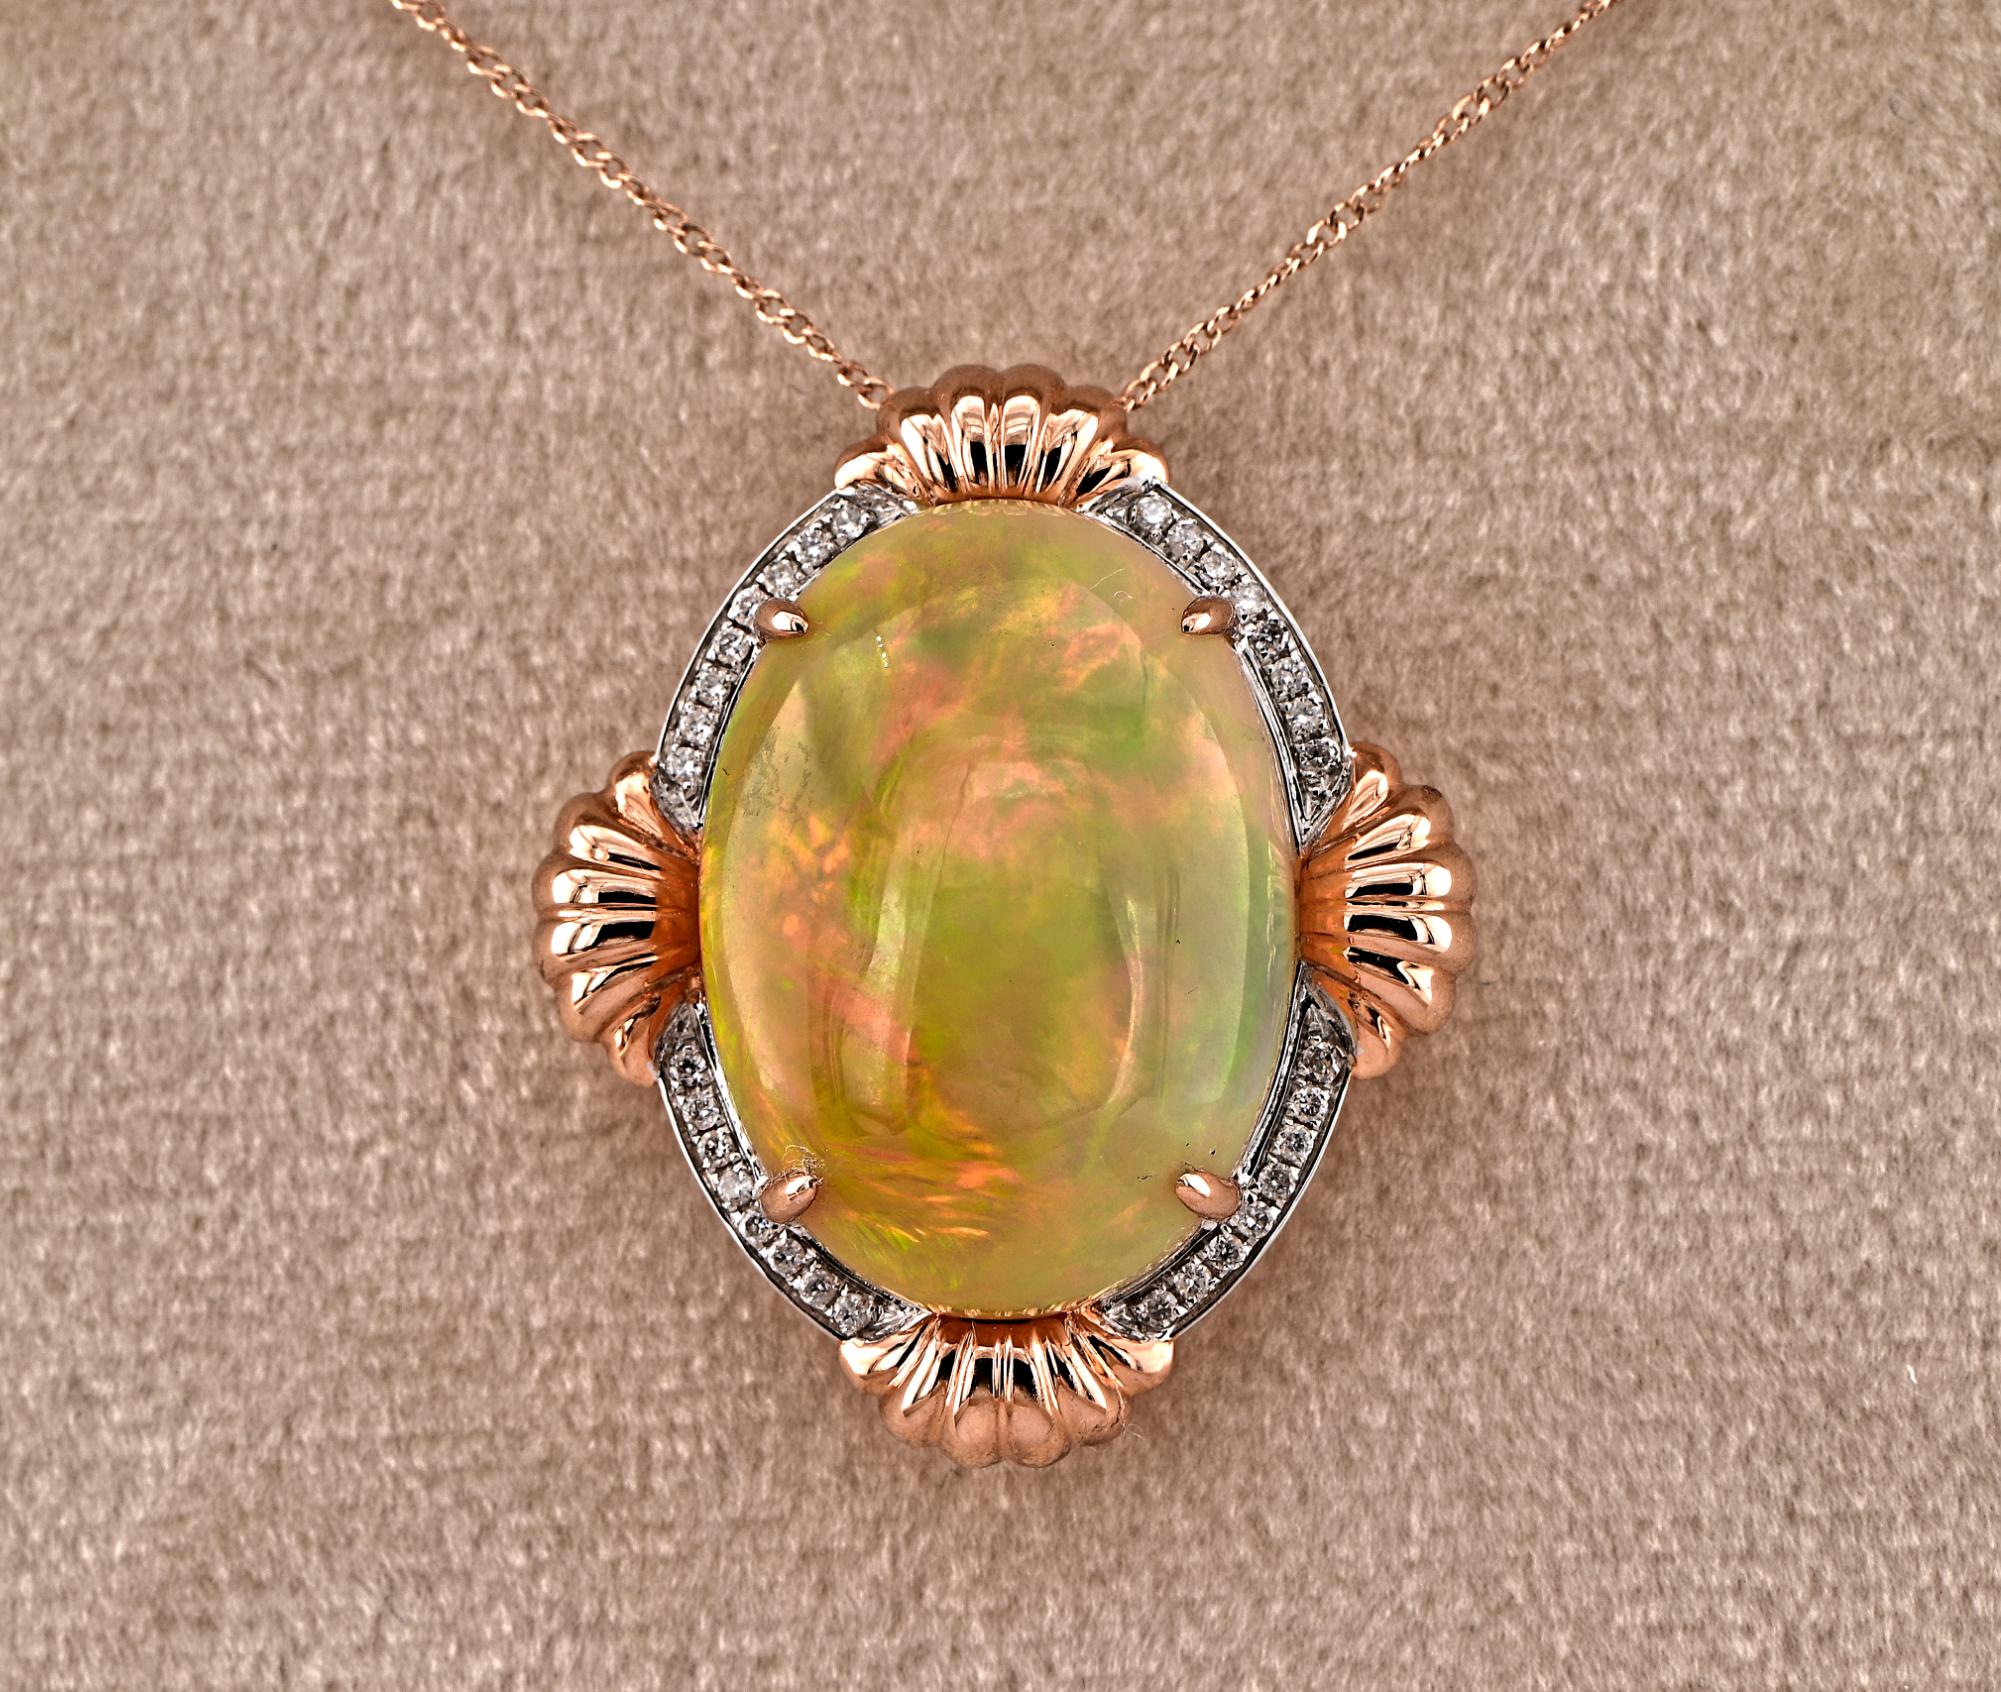 Queen of Gems
One of the world most amazing and magic stone on earth, who inspired writers describing Opals as volcano lava flows, galaxies and fireworks. Some Opali carry such a colour play like flame burning, holding all the power of the